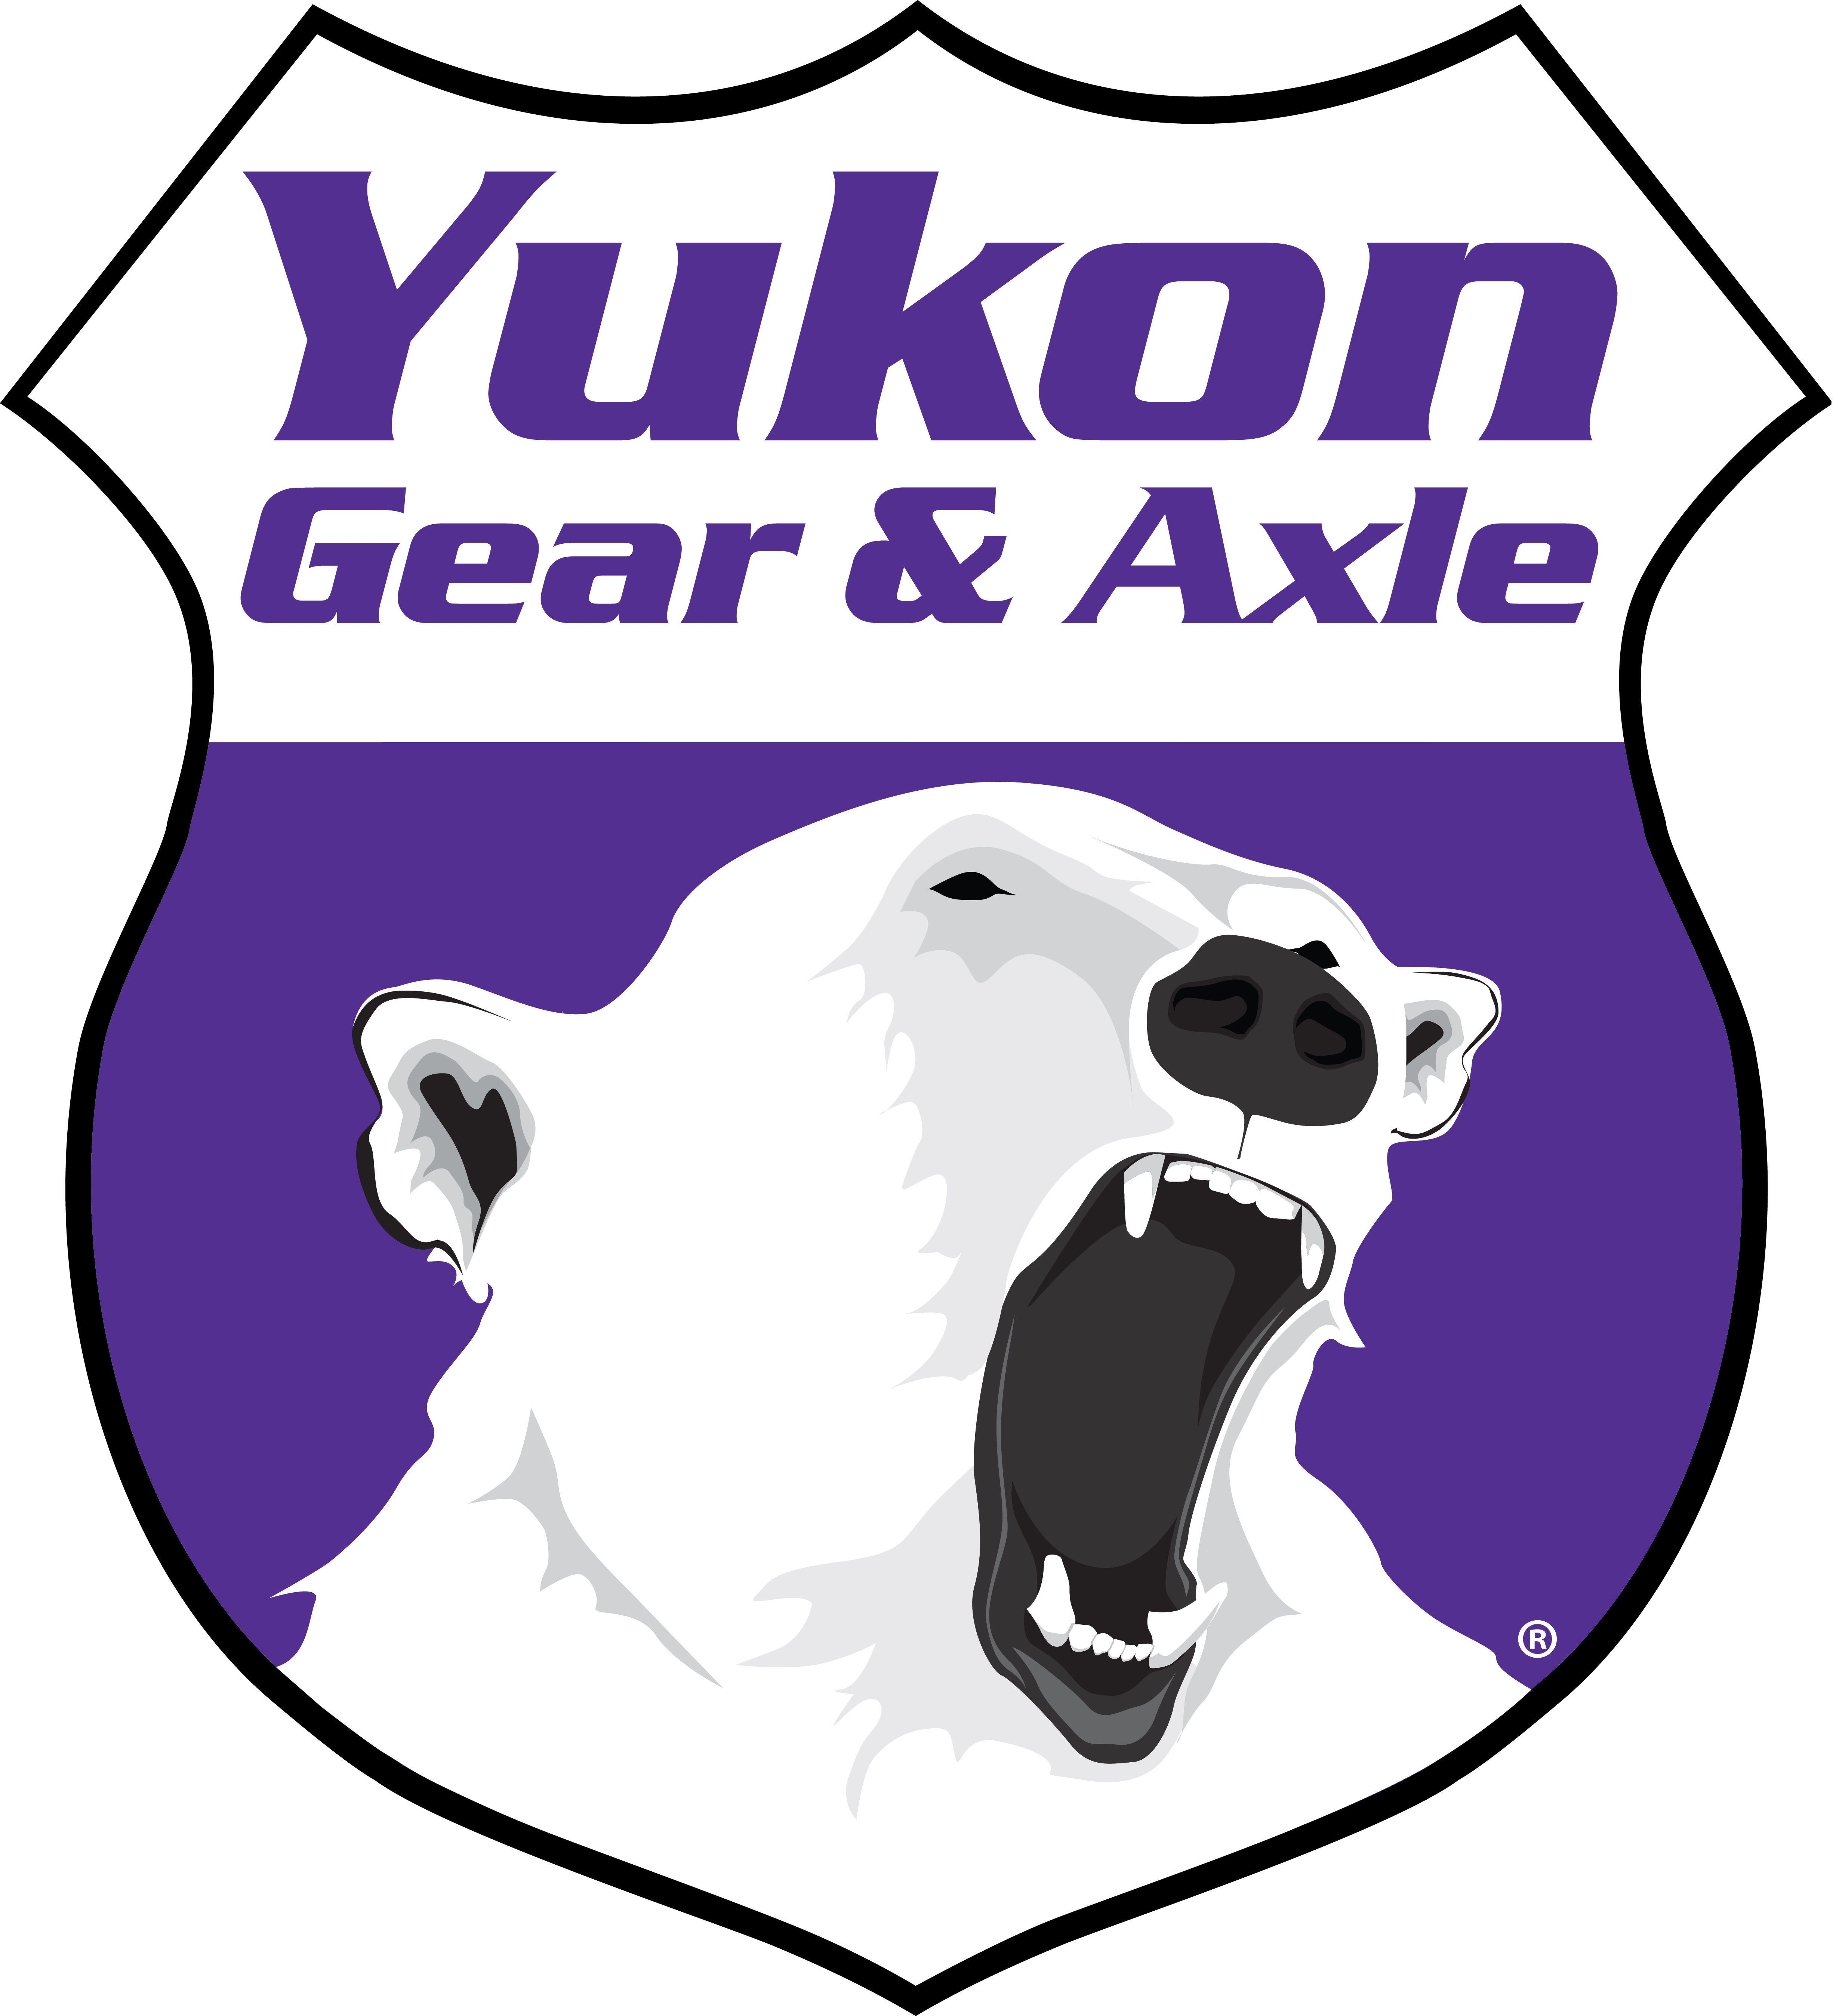 Yukon Bearing install kit for '99-'07 Ford 10.5" differential 